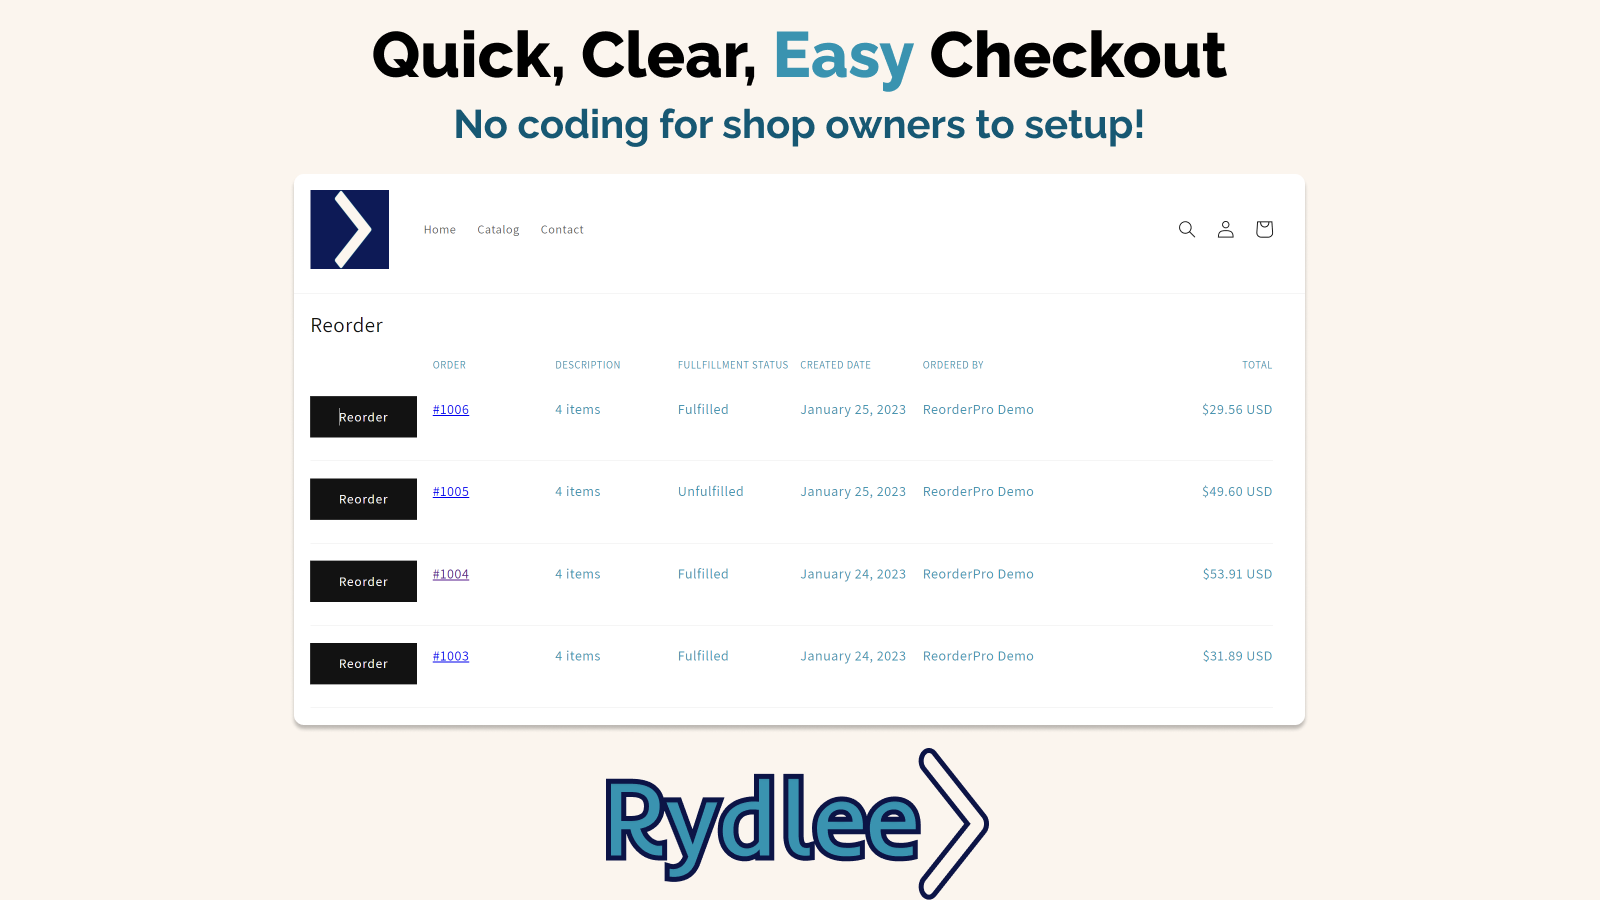 Customer order history, and customizable reorder button.